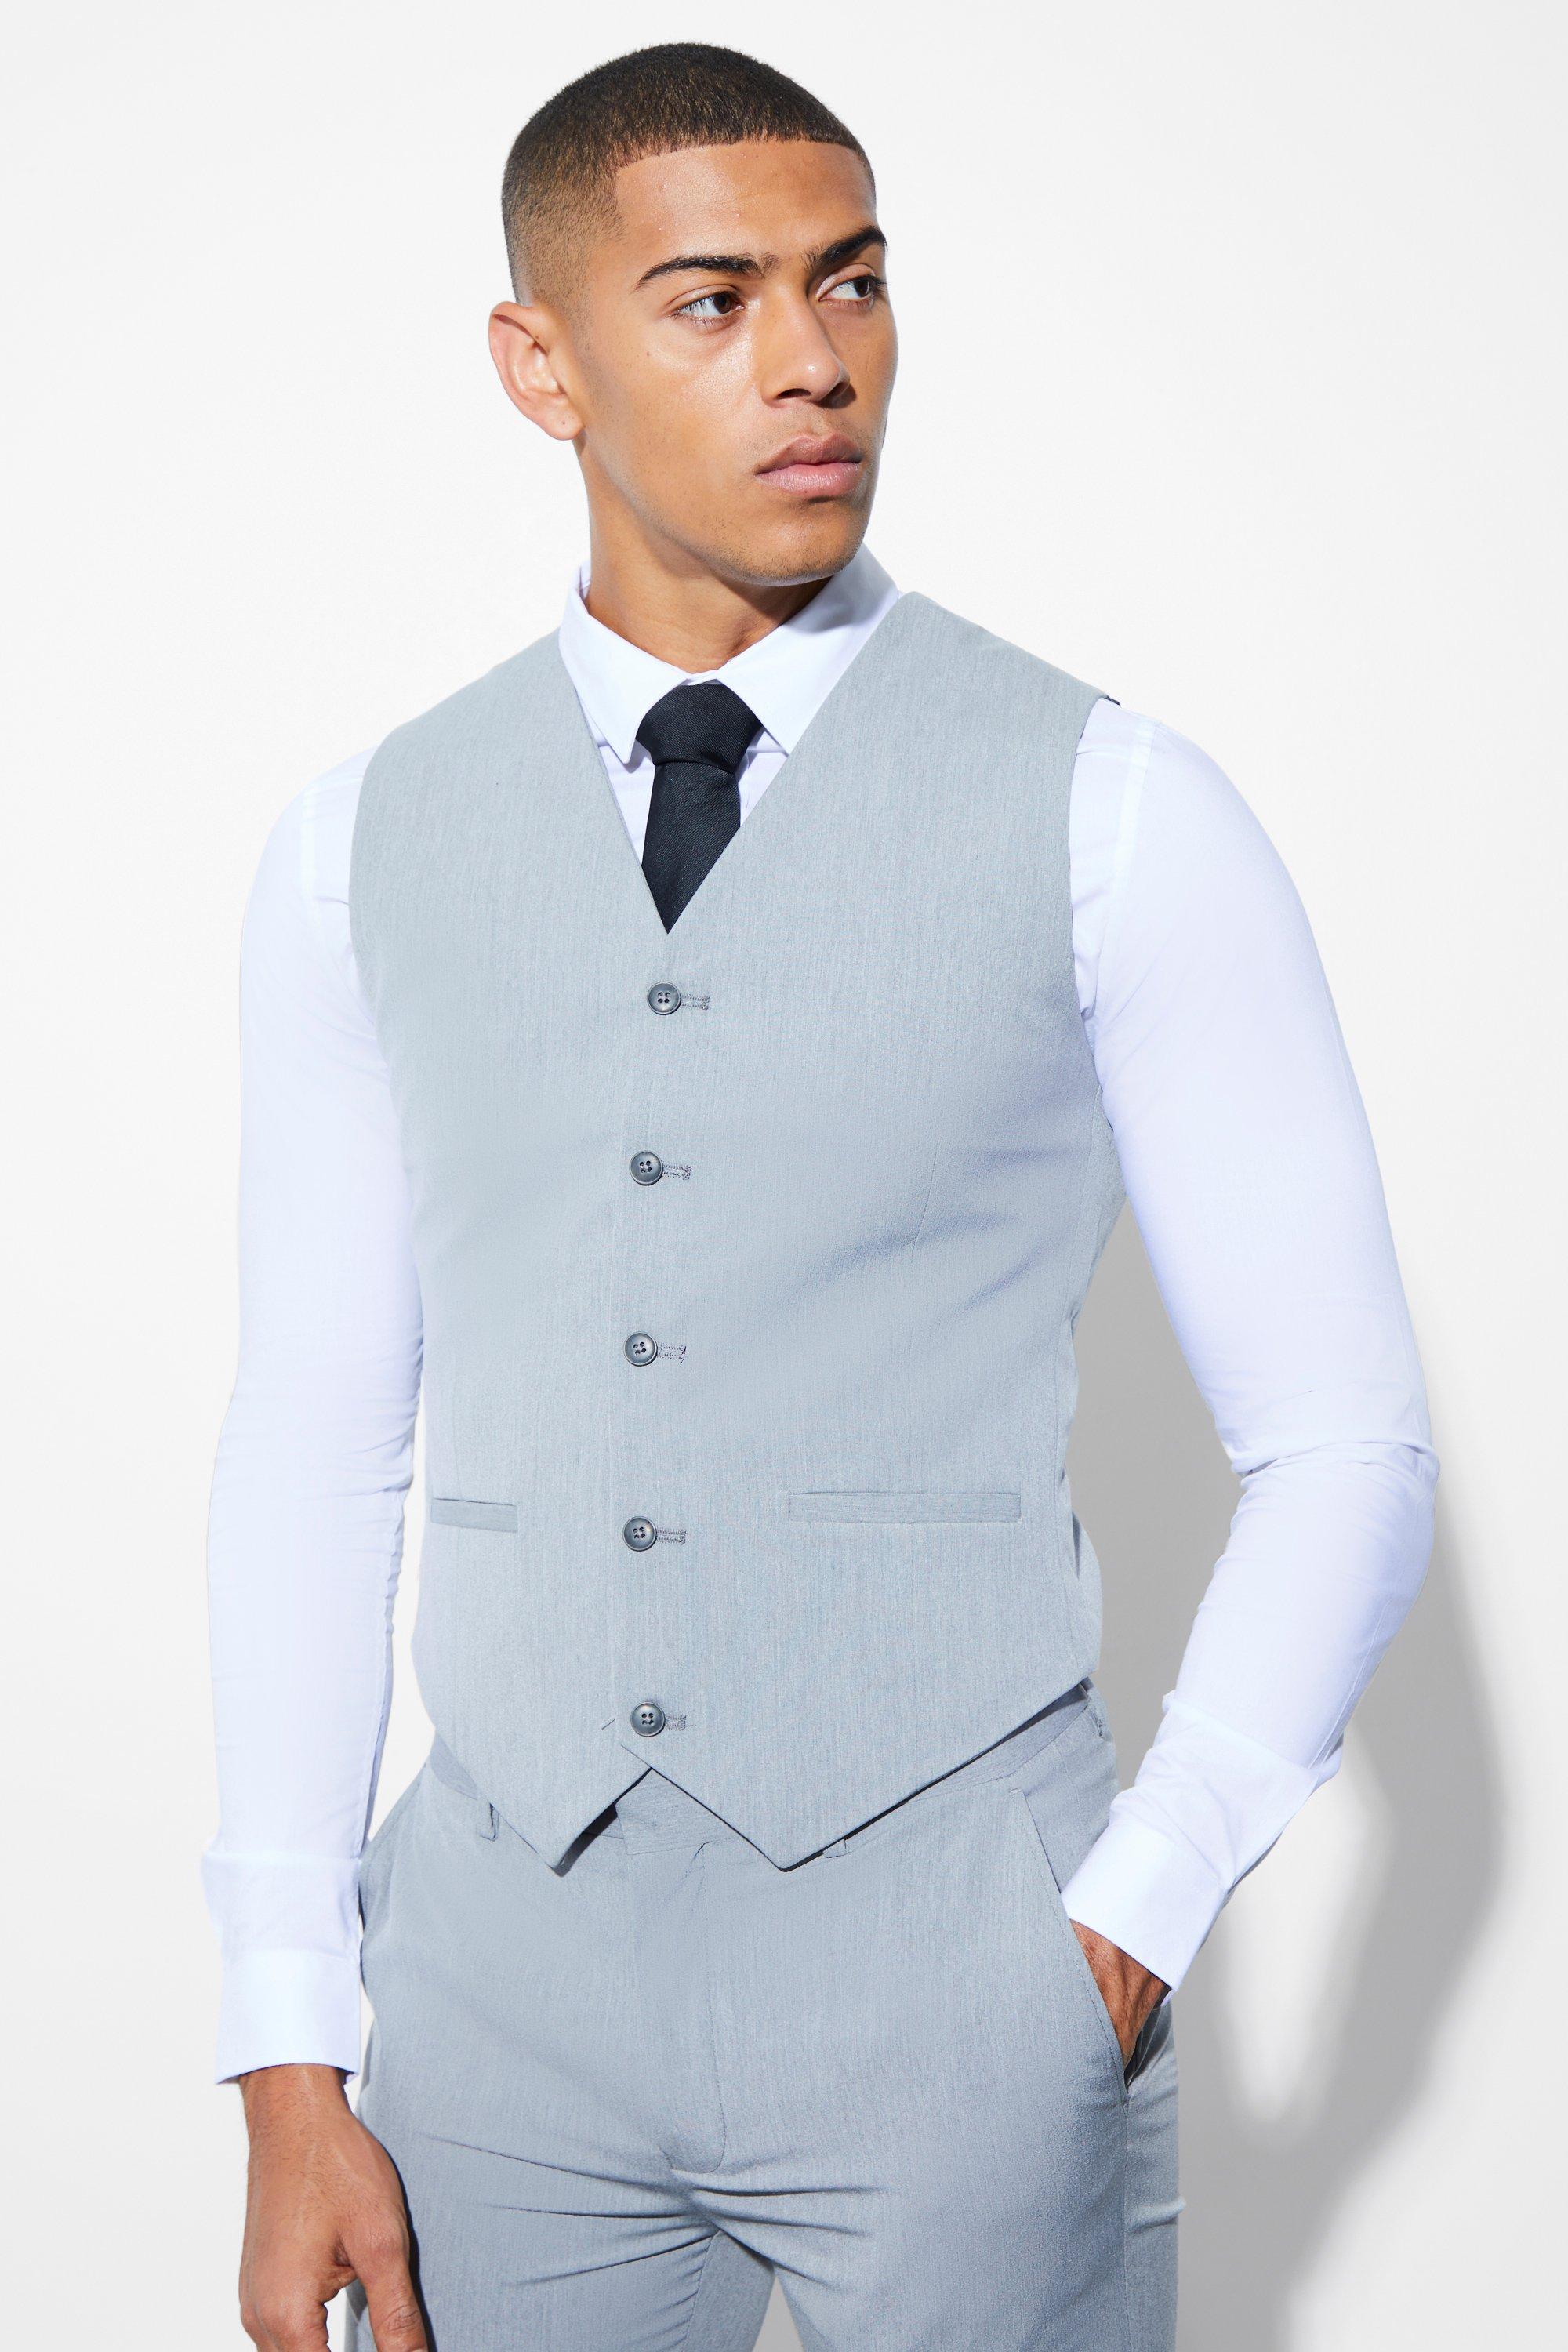 Mens Suit Jacket Waistcoat Trousers Grey Formal Wedding Business Sold  Separately Set - Etsy